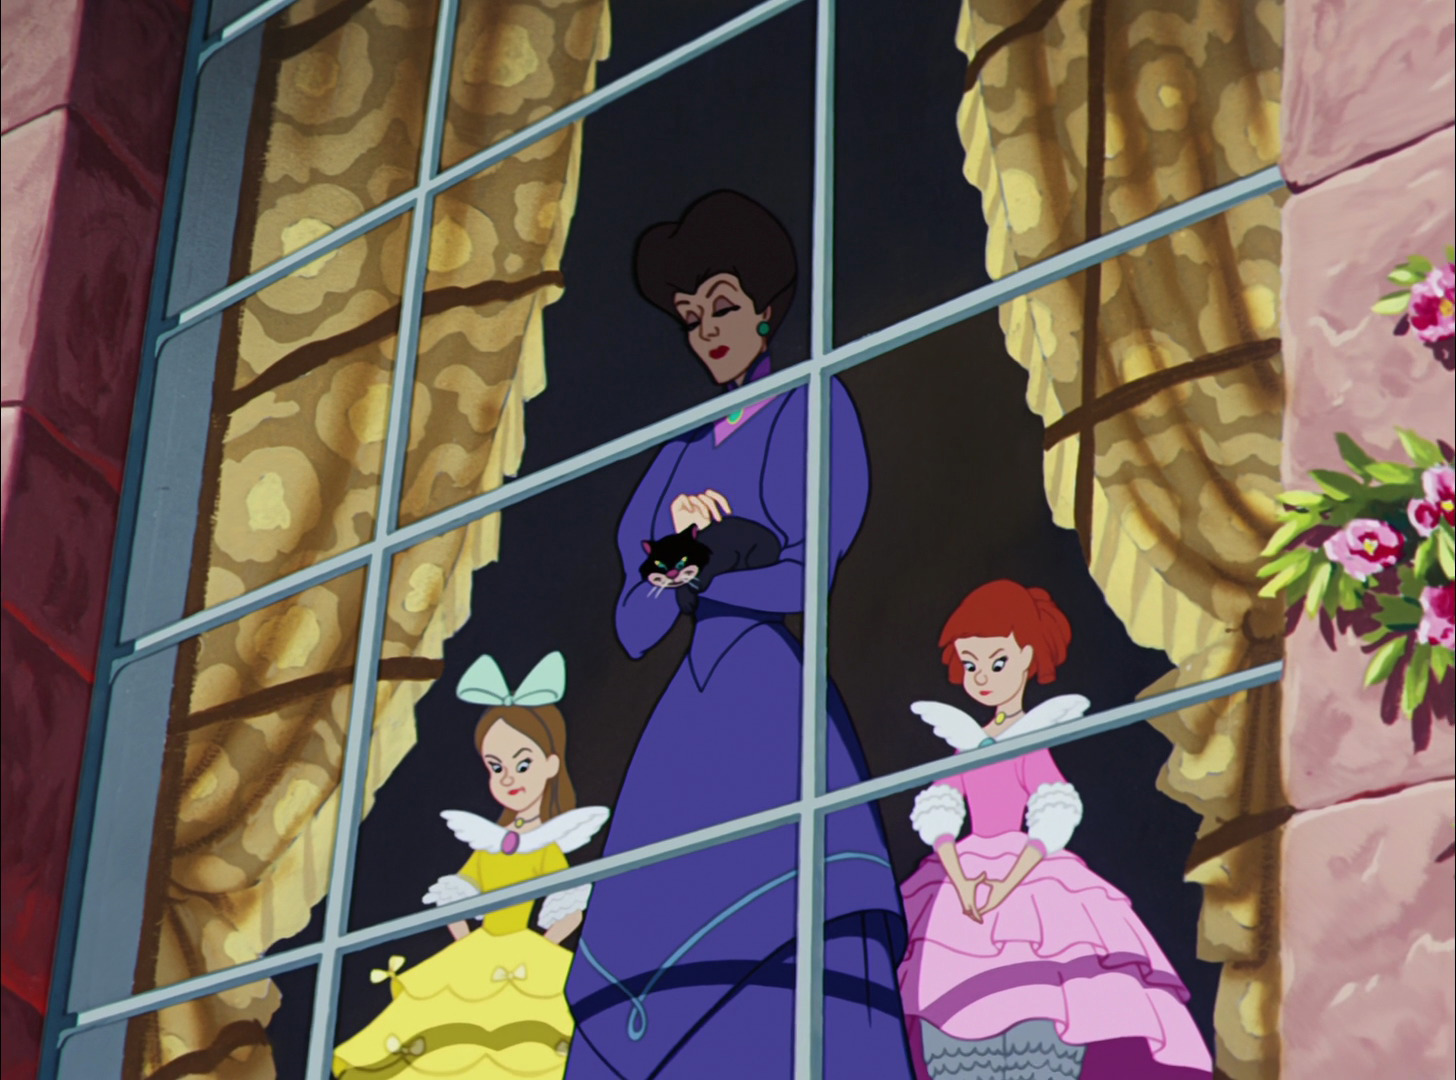 Do you think Lady Tremaine actually loves Anastasia and Drizella? Poll